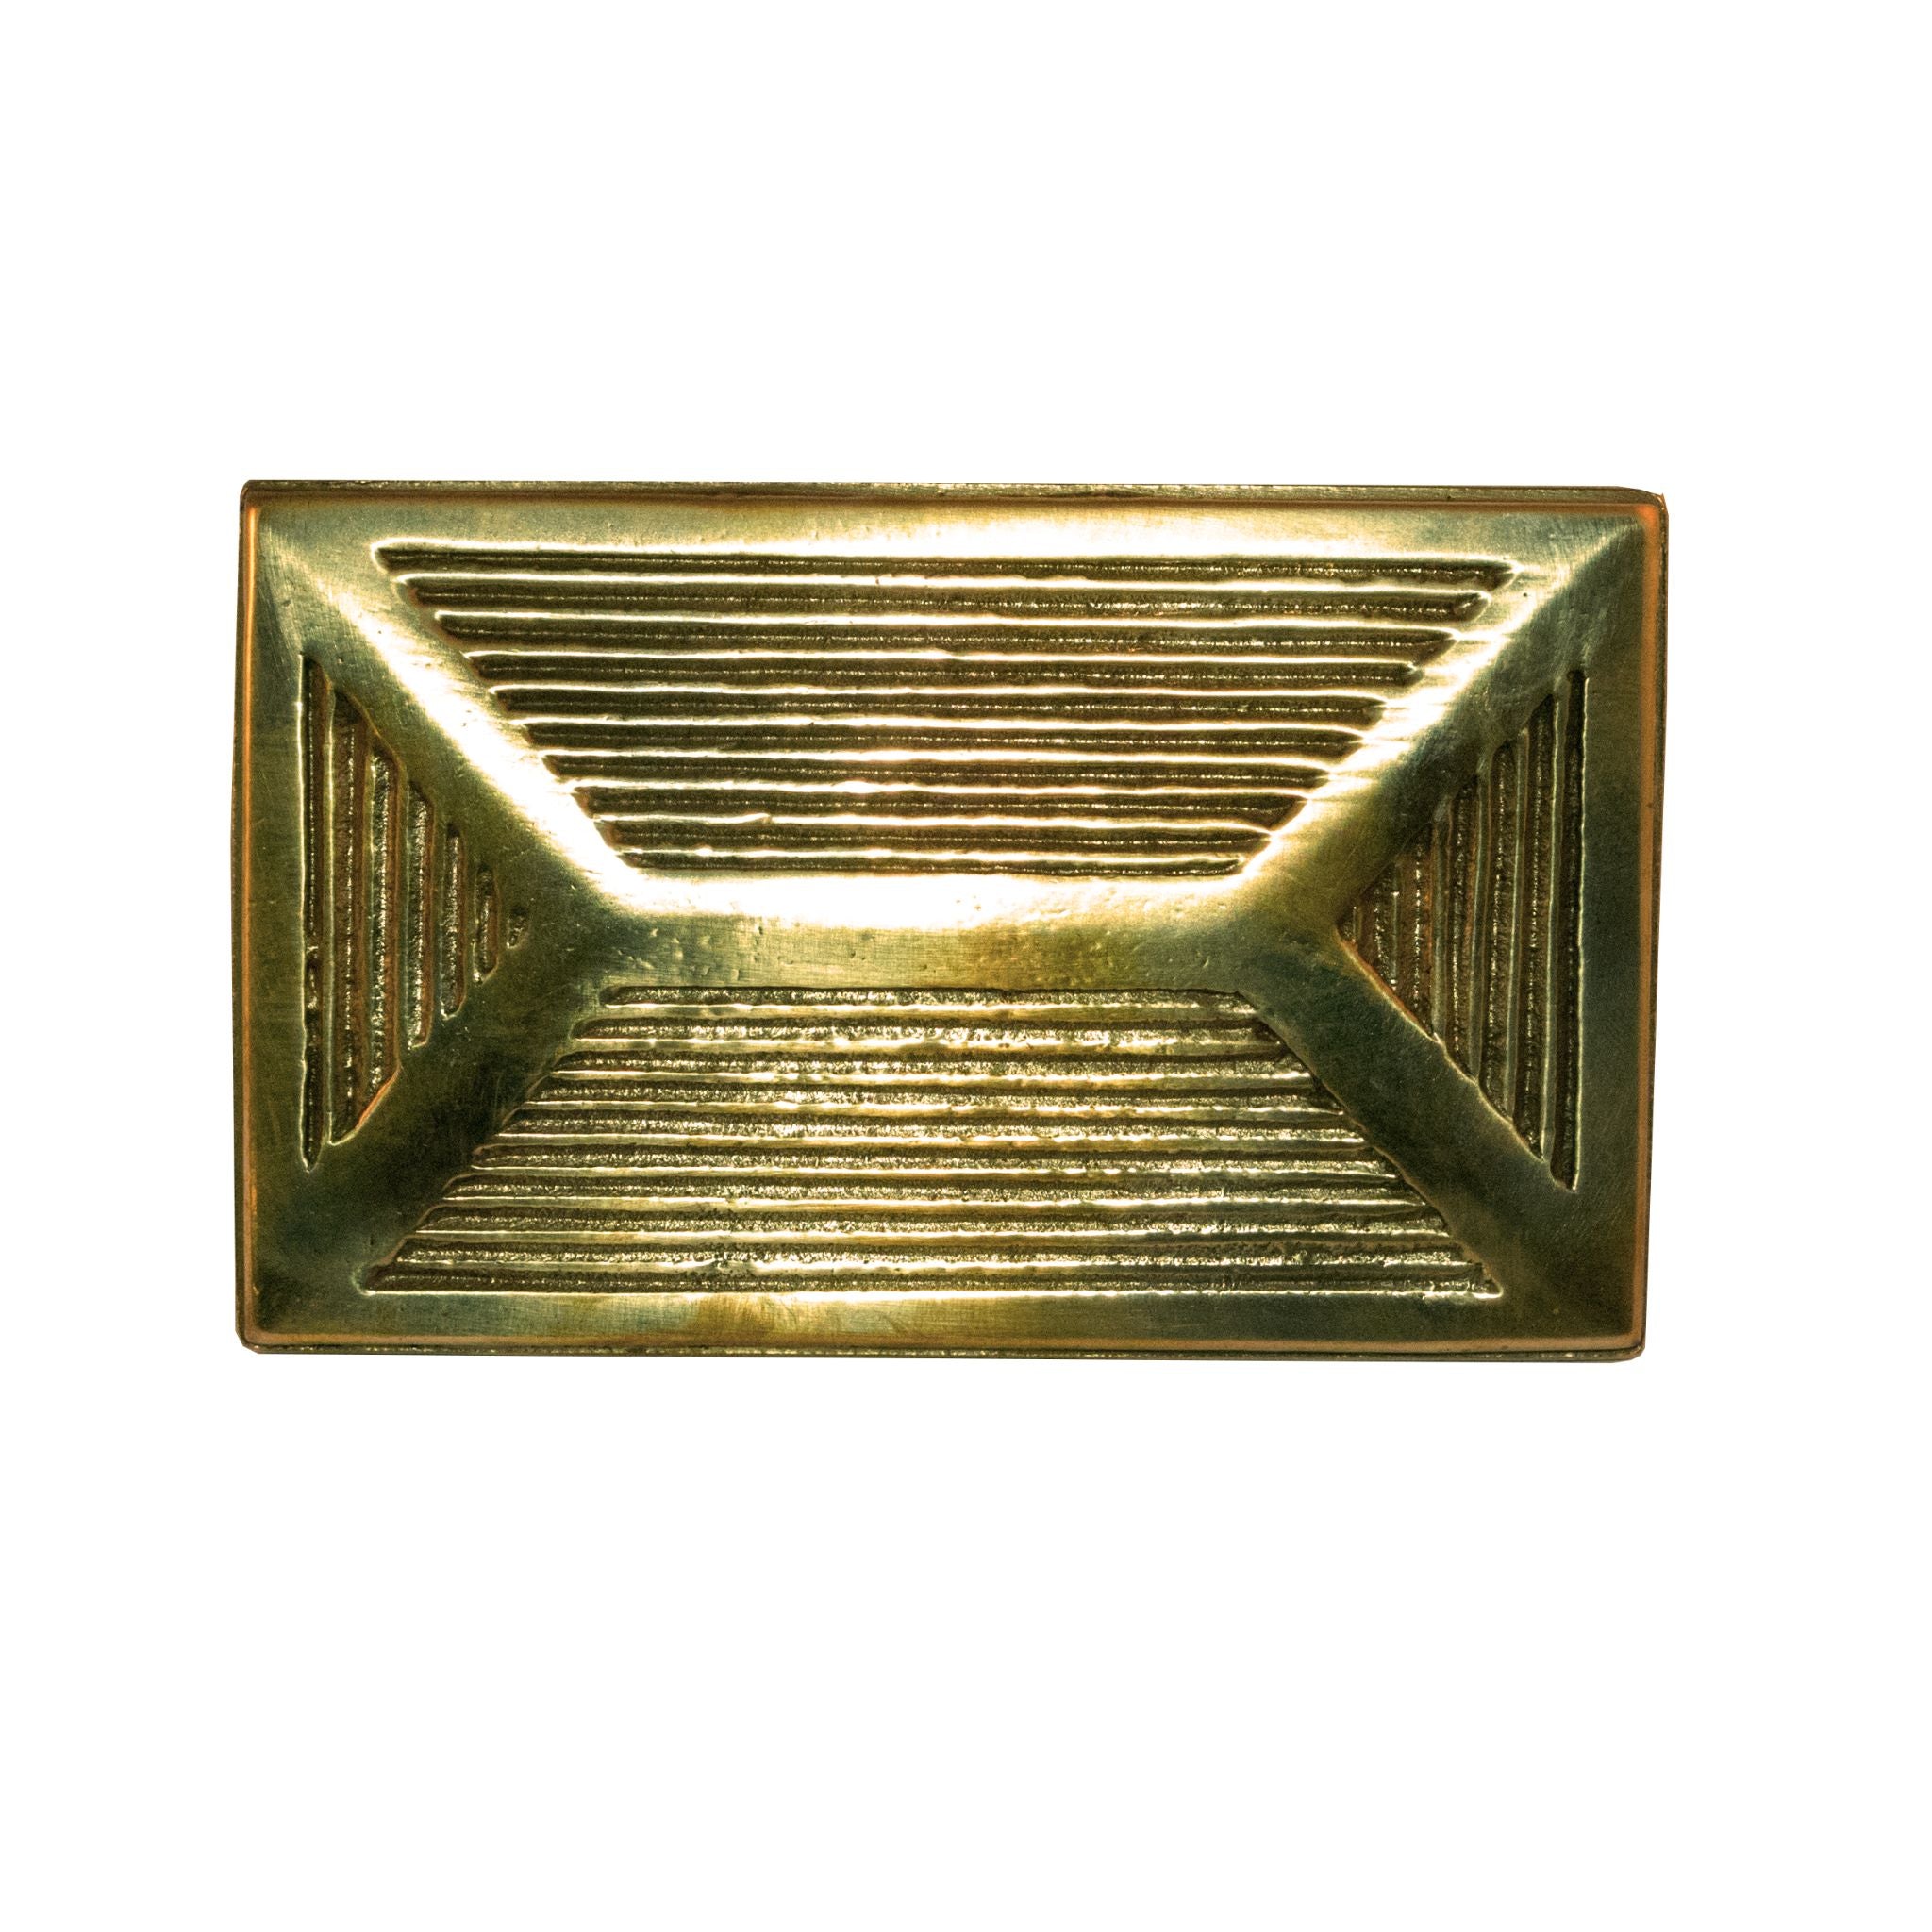 An image of a rectangular brass knob against a neutral background. The knob features clean lines and a sleek design, adding a modern touch to furniture or drawers.